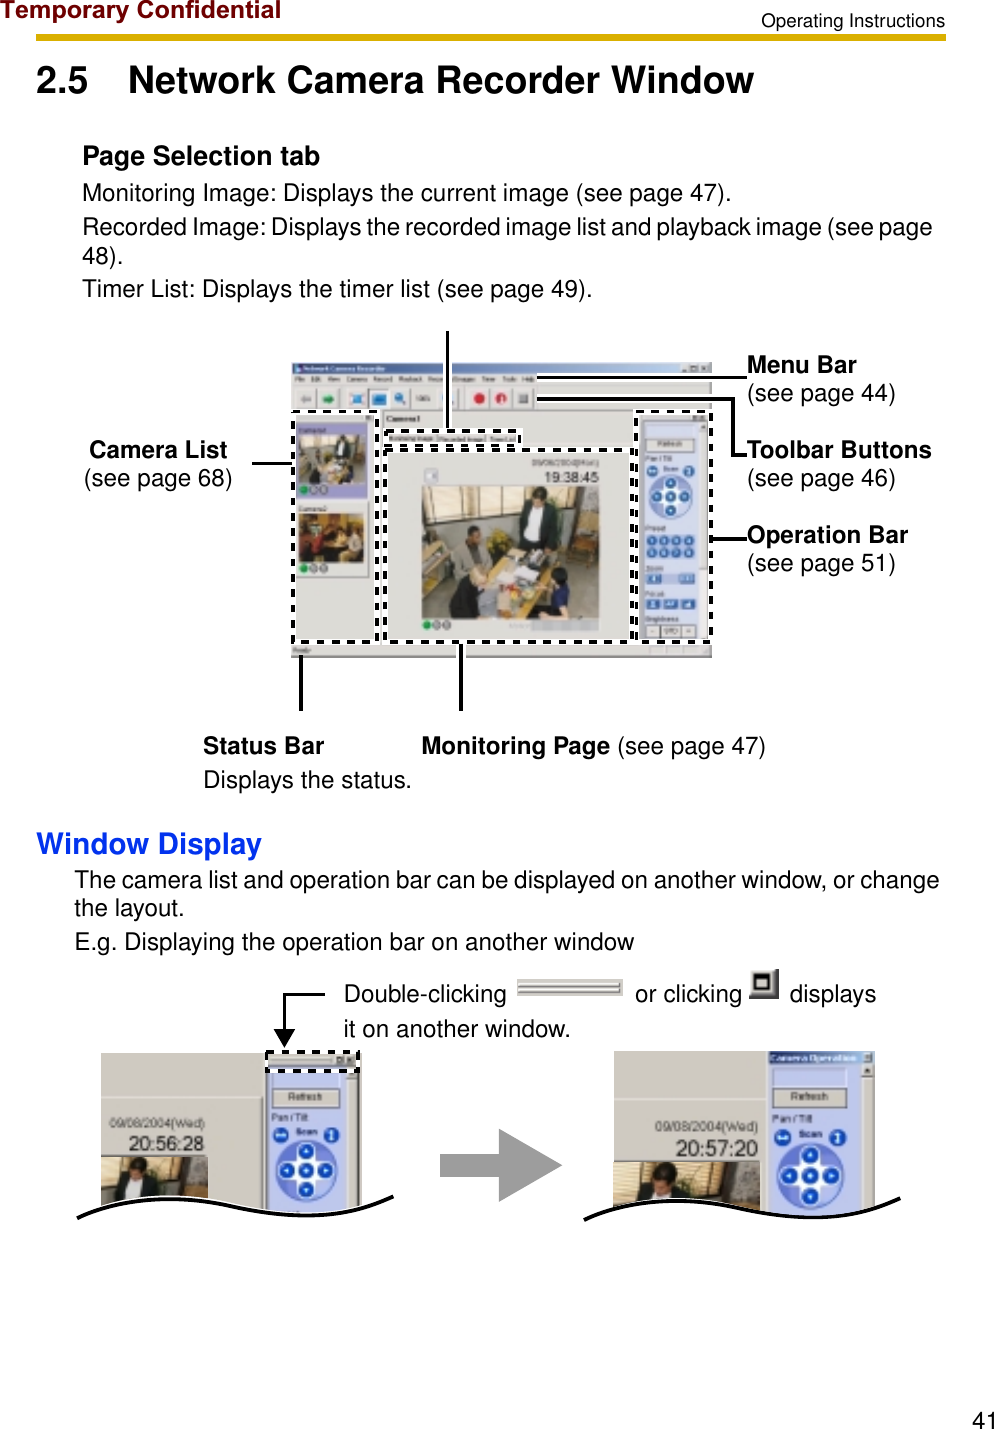 Operating Instructions412.5 Network Camera Recorder WindowWindow DisplayThe camera list and operation bar can be displayed on another window, or change the layout.E.g. Displaying the operation bar on another windowPage Selection tabMonitoring Image: Displays the current image (see page 47).Recorded Image: Displays the recorded image list and playback image (see page 48).Timer List: Displays the timer list (see page 49).Camera List(see page 68)Menu Bar(see page 44)Toolbar Buttons(see page 46)Operation Bar(see page 51)Status Bar Monitoring Page (see page 47)Displays the status.Double-clicking                   or clicking       displays it on another window.Temporary Confidential